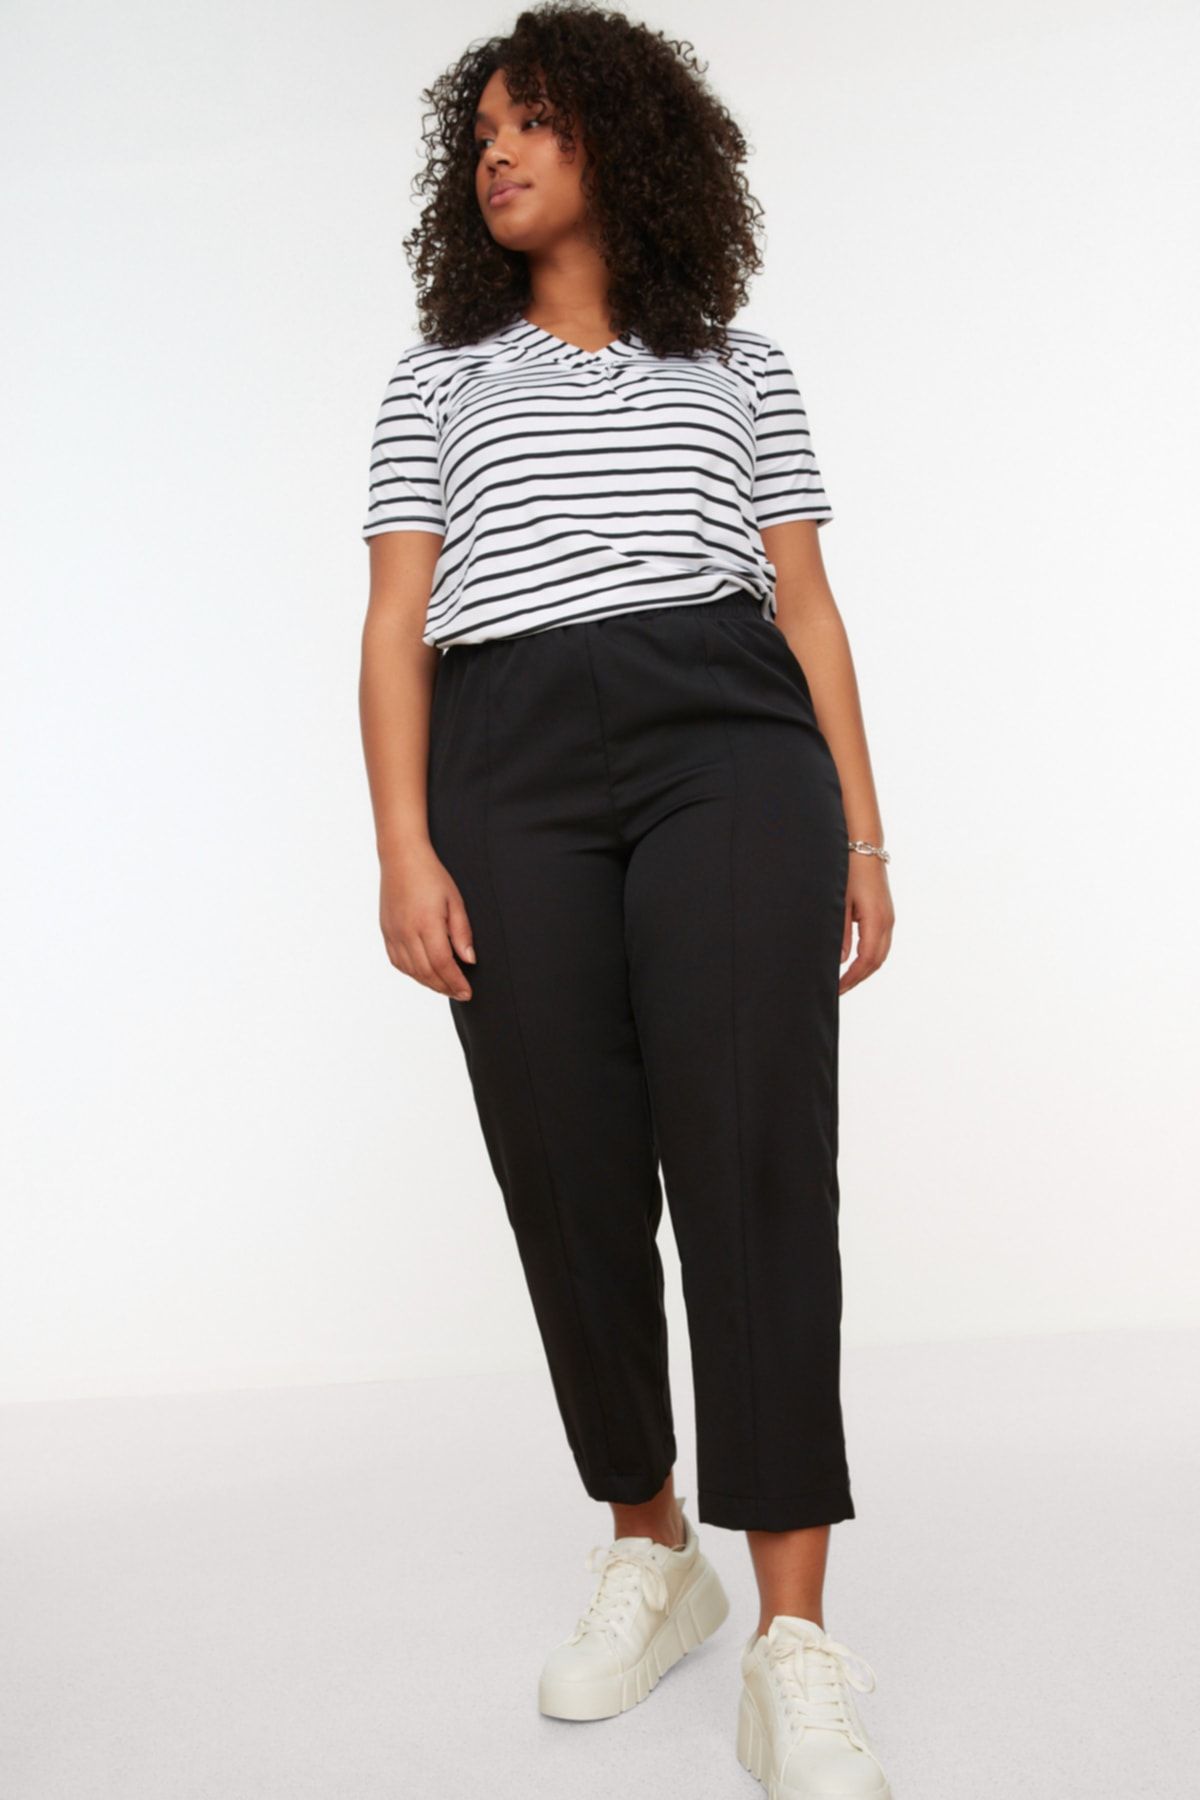 Plus Size Trousers  Womens Trousers  Pants  Simply Be